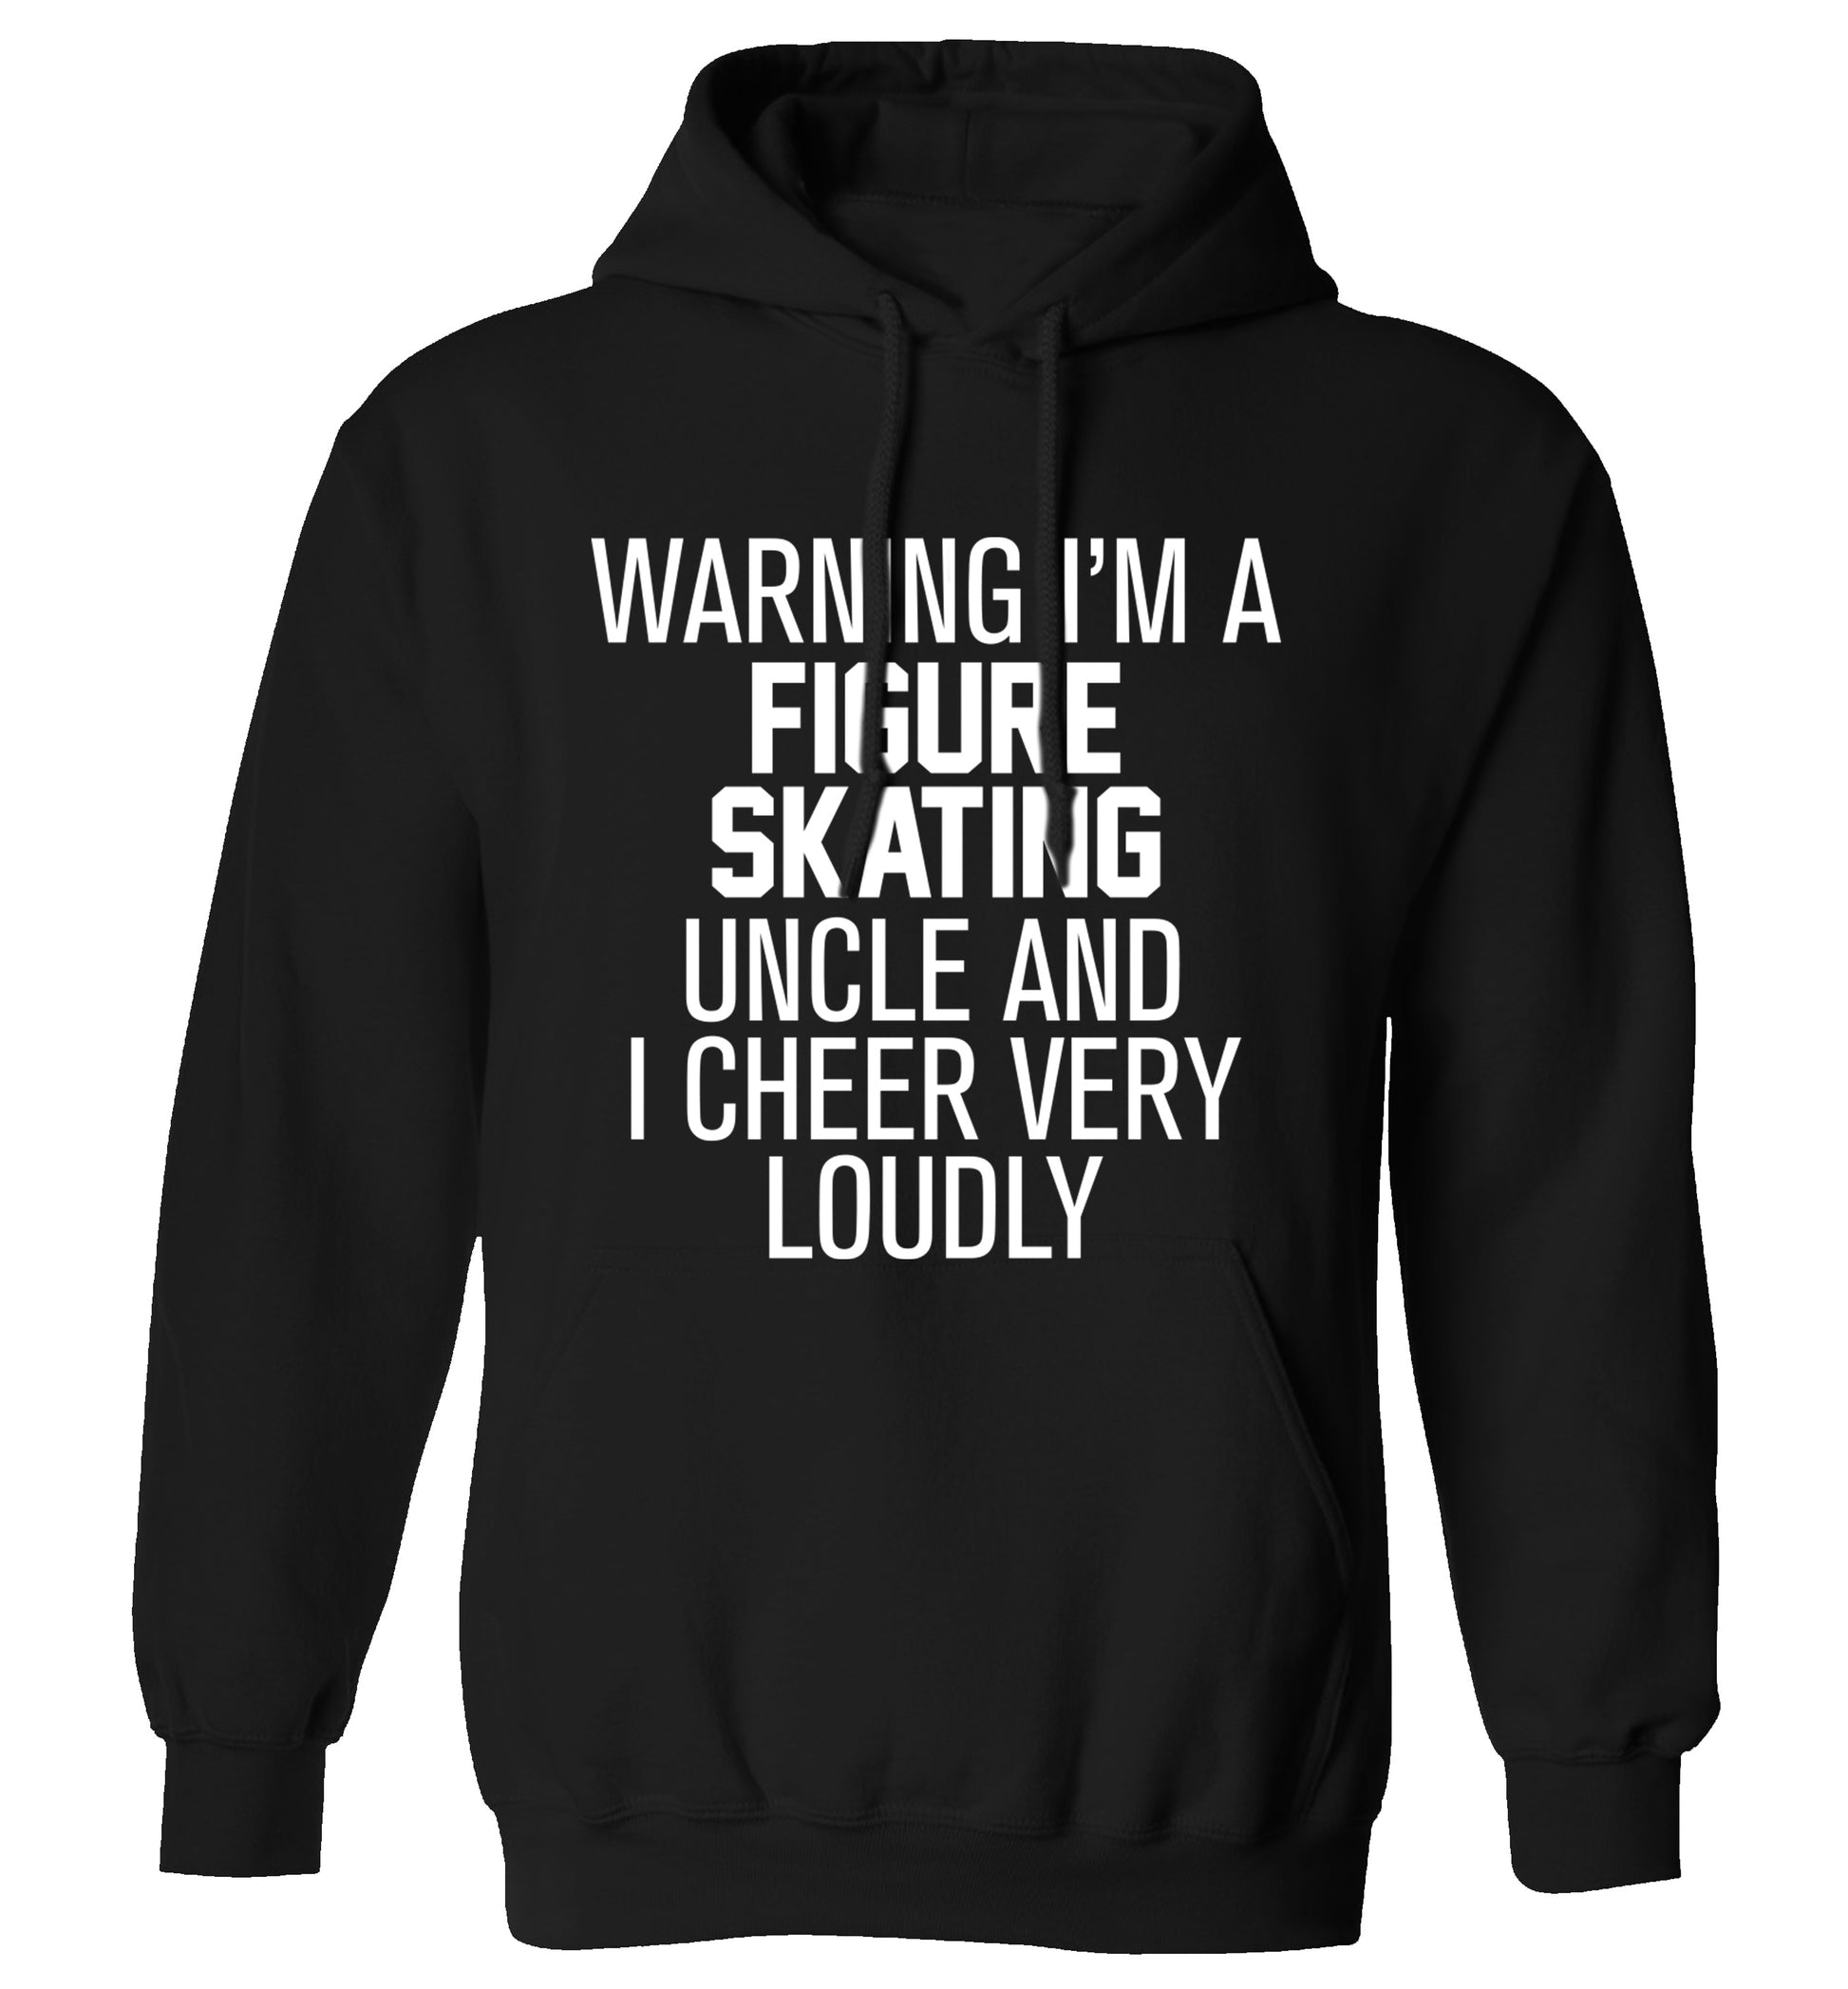 Warning I'm a figure skating uncle and I cheer very loudly adults unisexblack hoodie 2XL